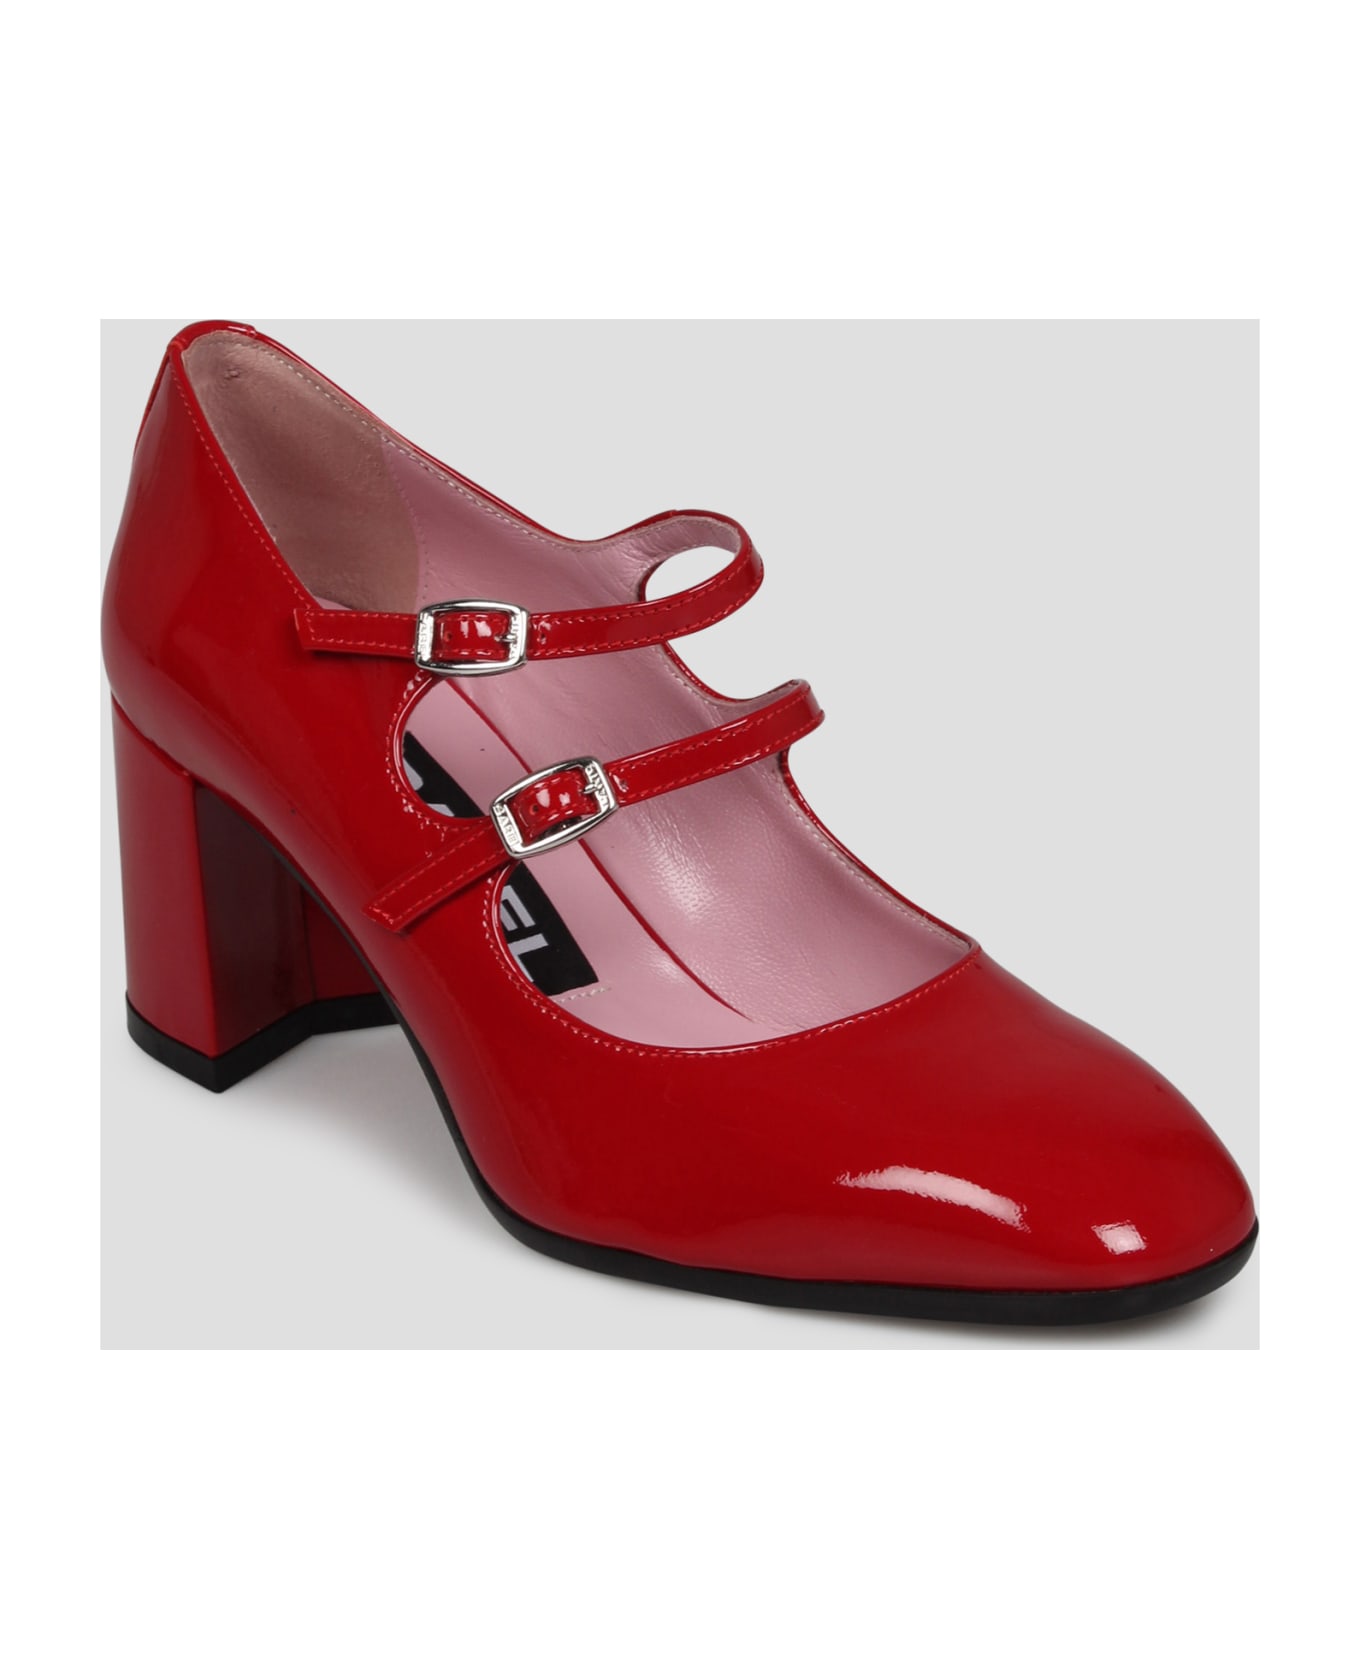 Carel Alice Mary Jane Pumps - Red